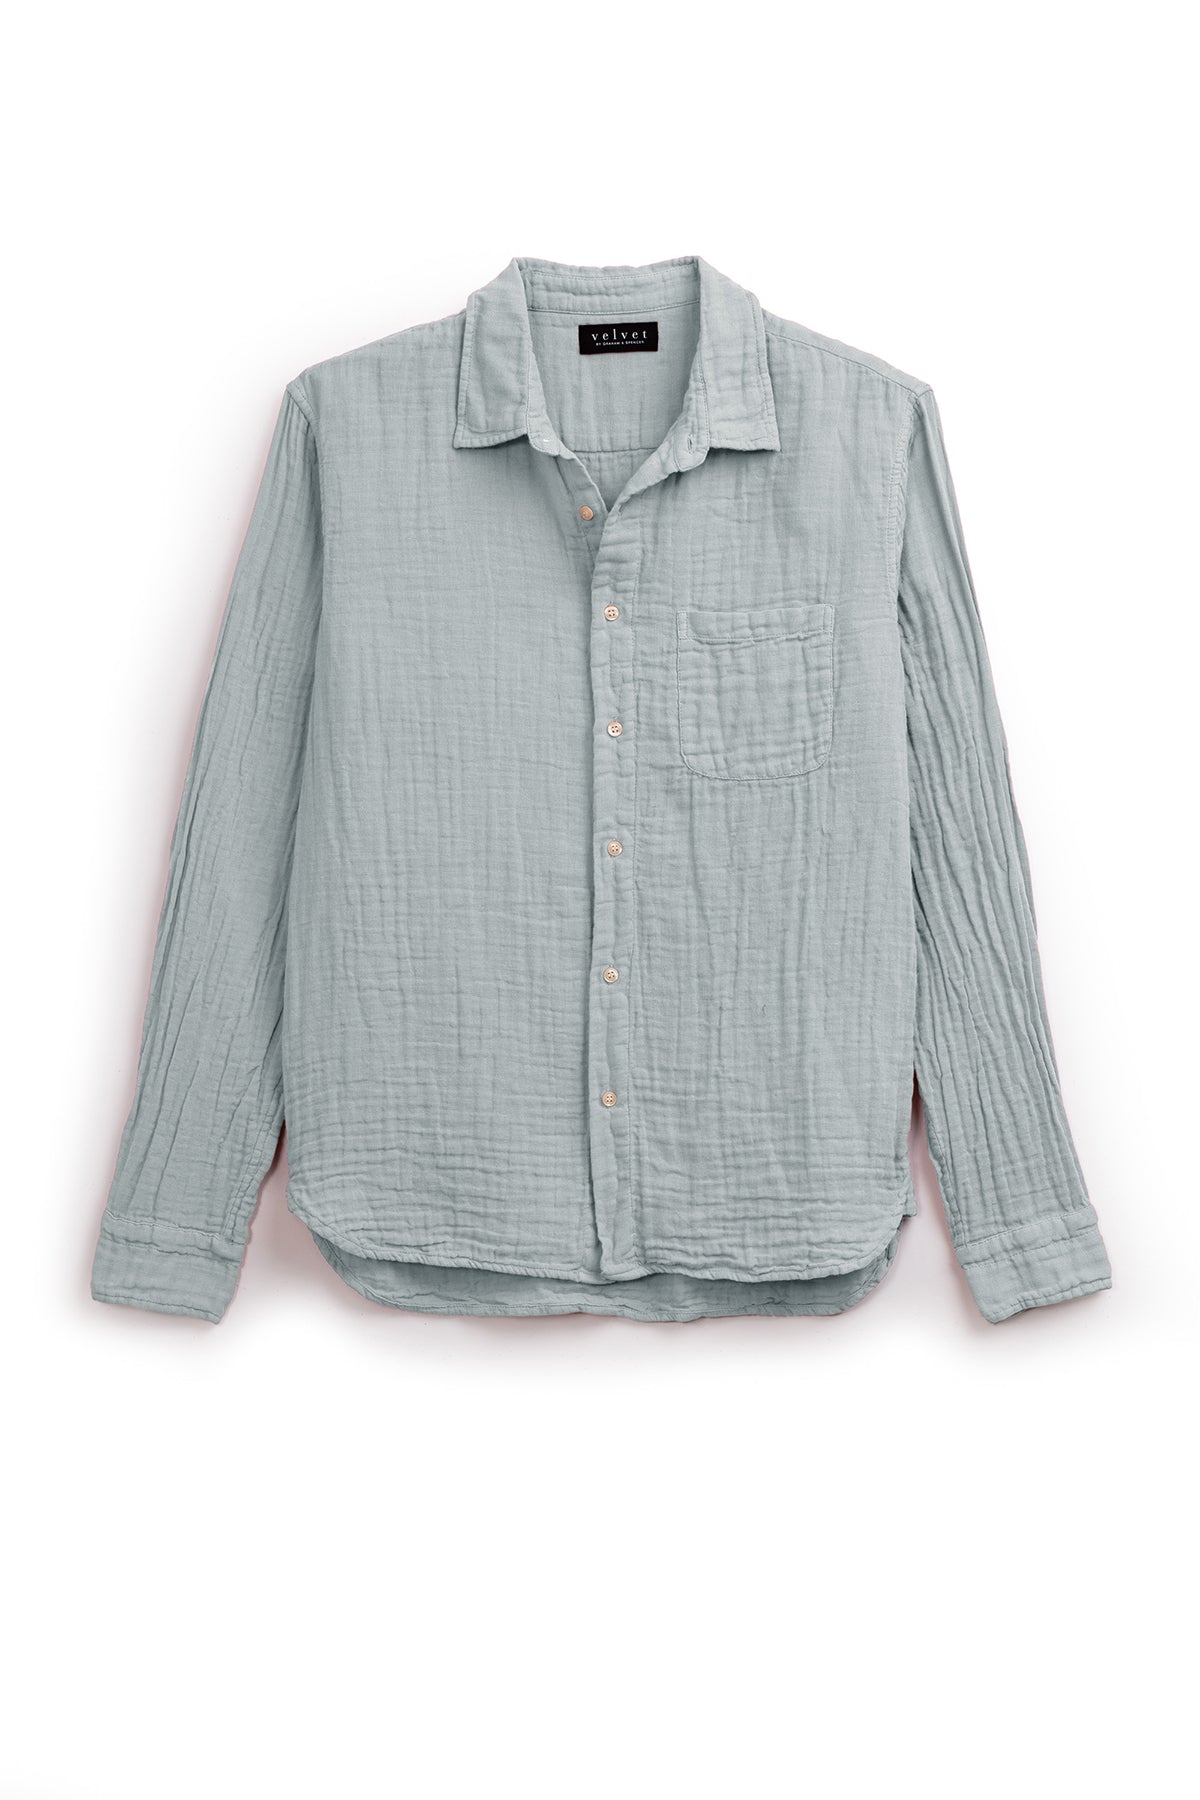 Elton Button-Up Shirt in ice blue flat-26630101893313